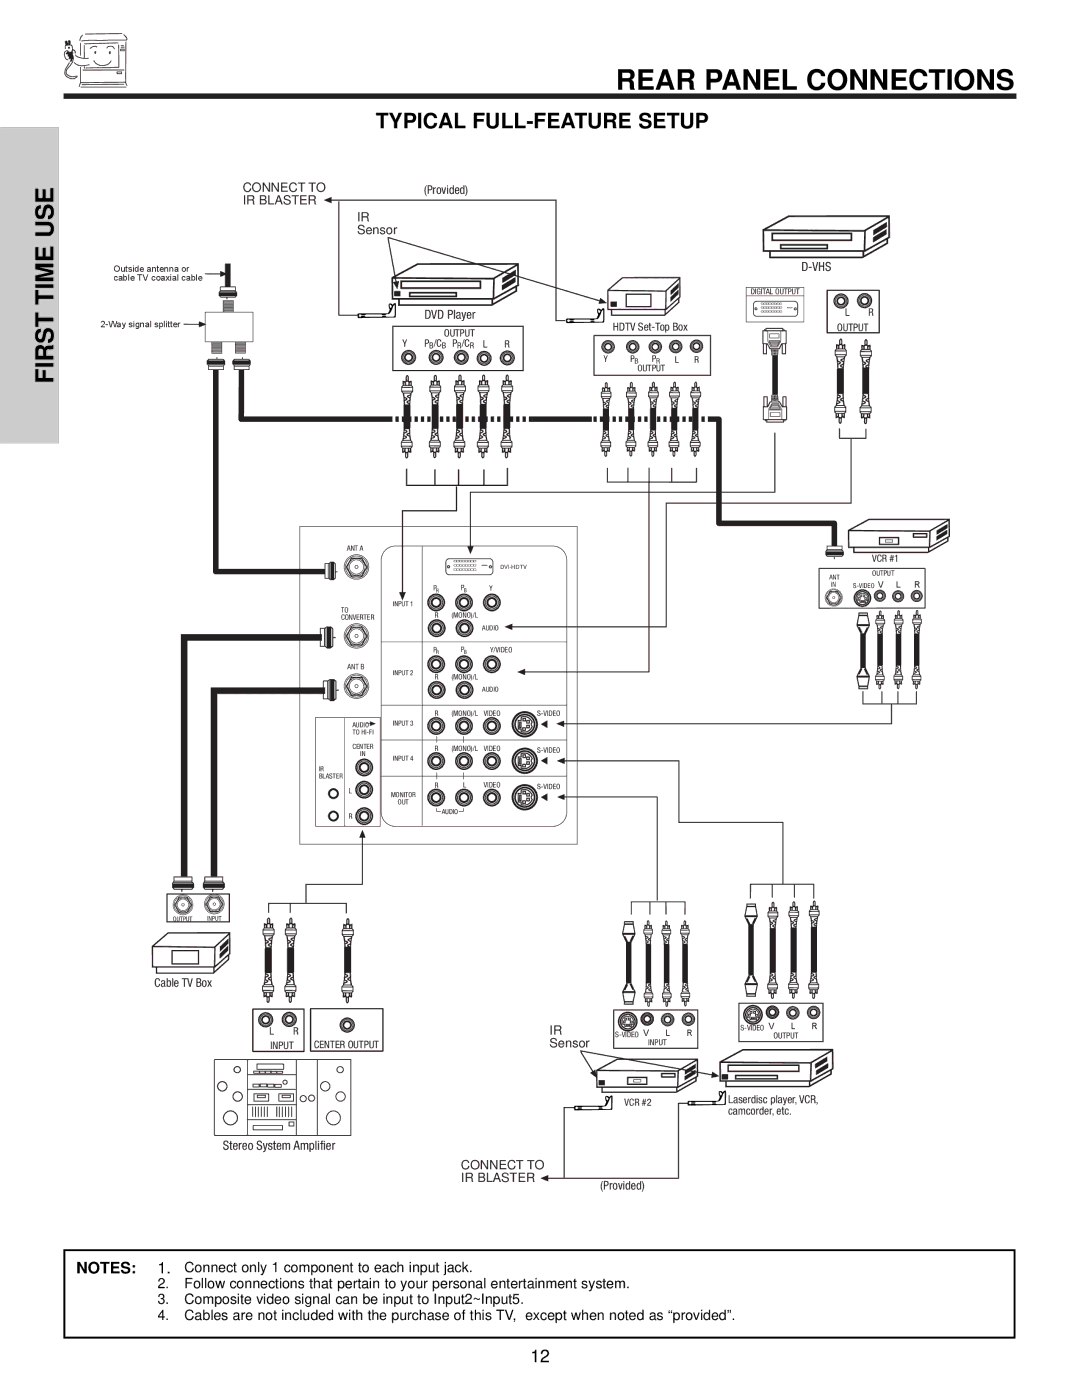 Hitachi 50VX500, 50V500A, 60VX500 important safety instructions Rear Panel Connections, Typical FULL-FEATURE Setup 